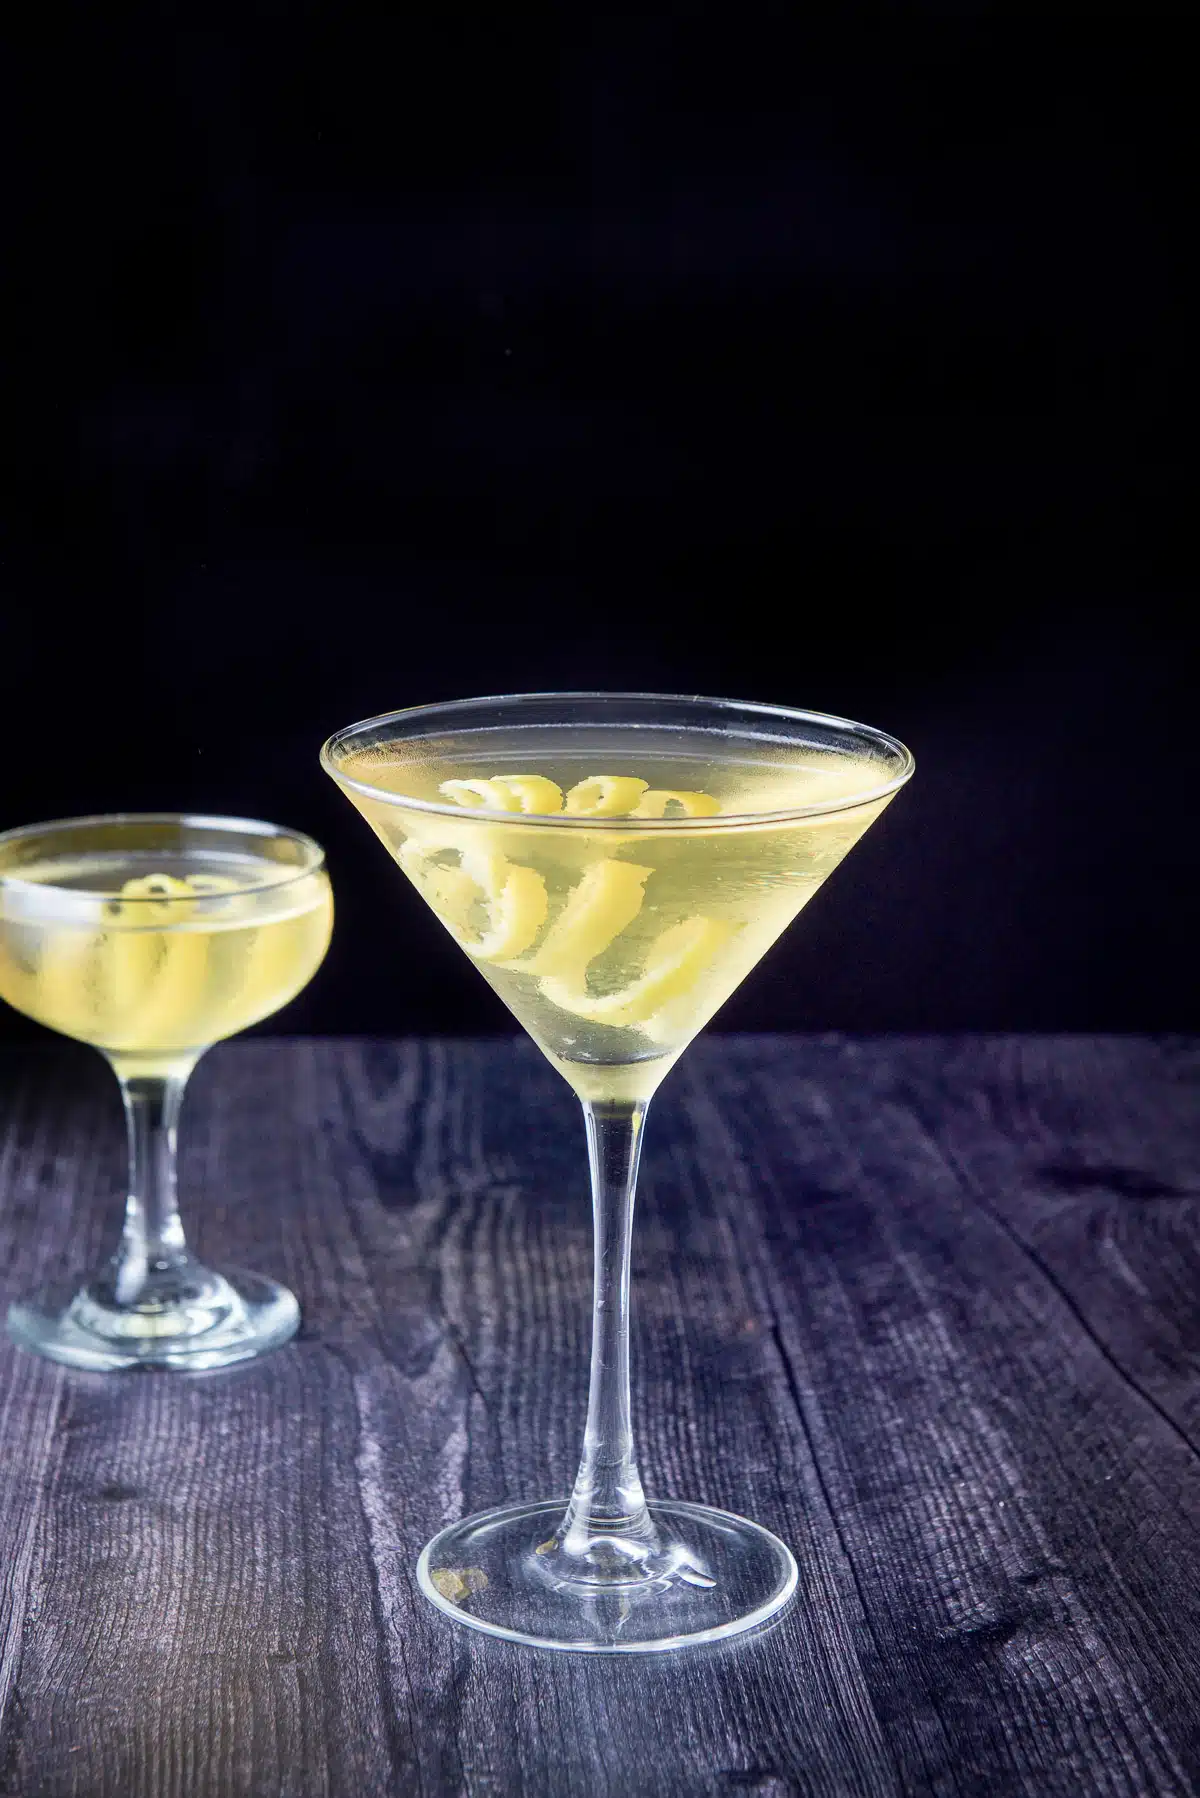 Classic martini glass in front of a coupe glass, filled with the Claridge. They both have lemon twists as garnish